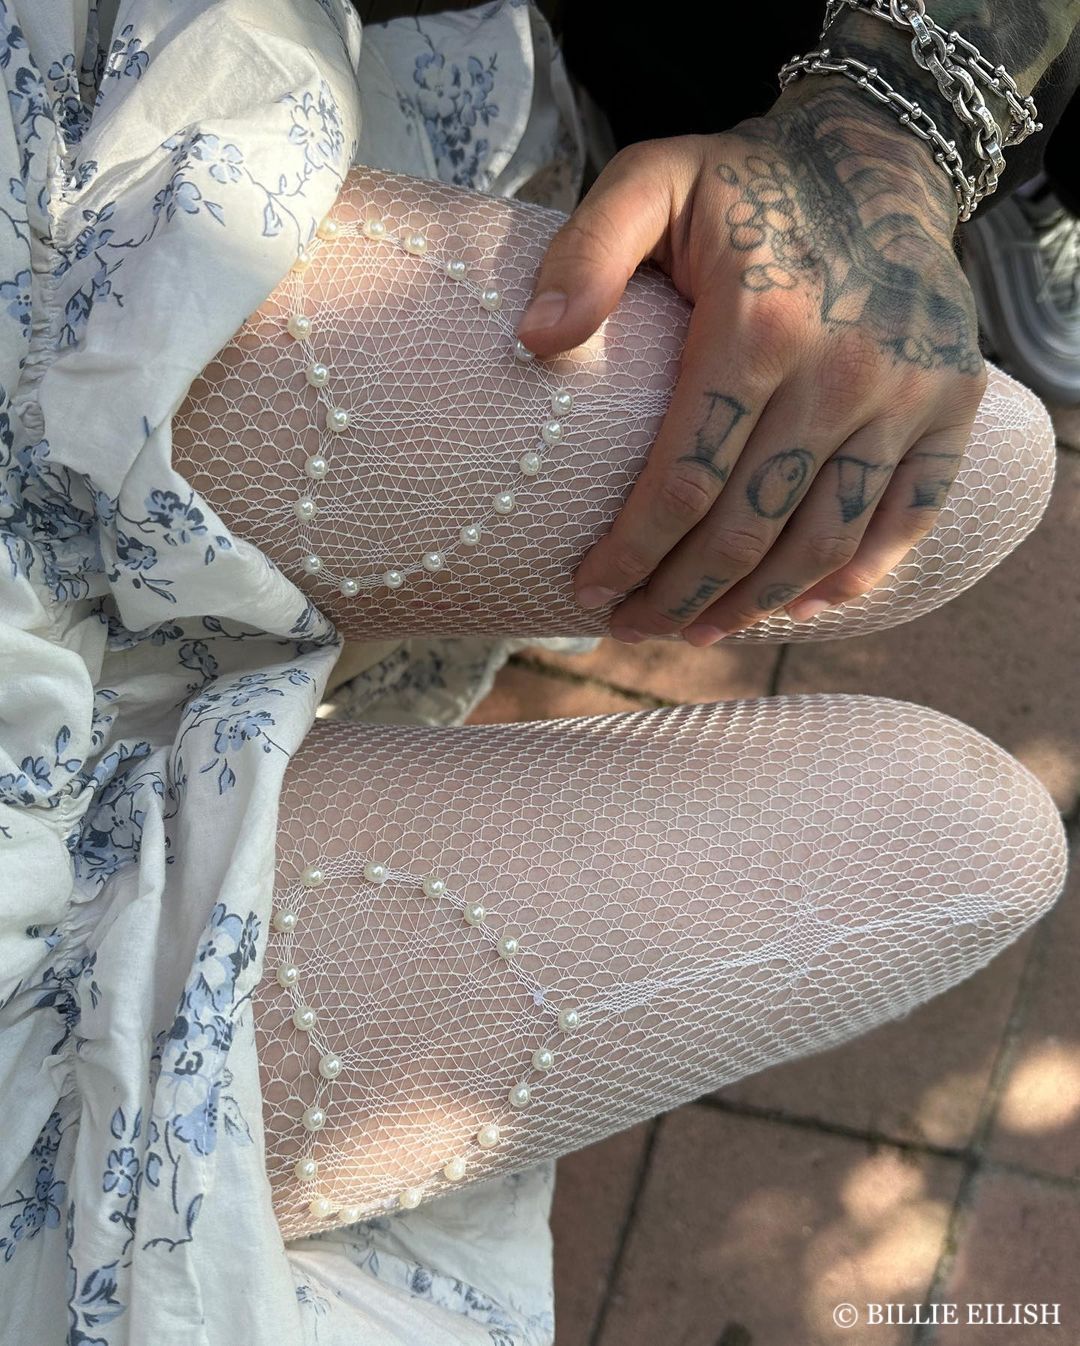 Custom Pearly Heart tights (White) Fishnet Stockings Pantyhose | Vintage Pearl Tights | Wedding Pantyhose | Bridal Heart Tights